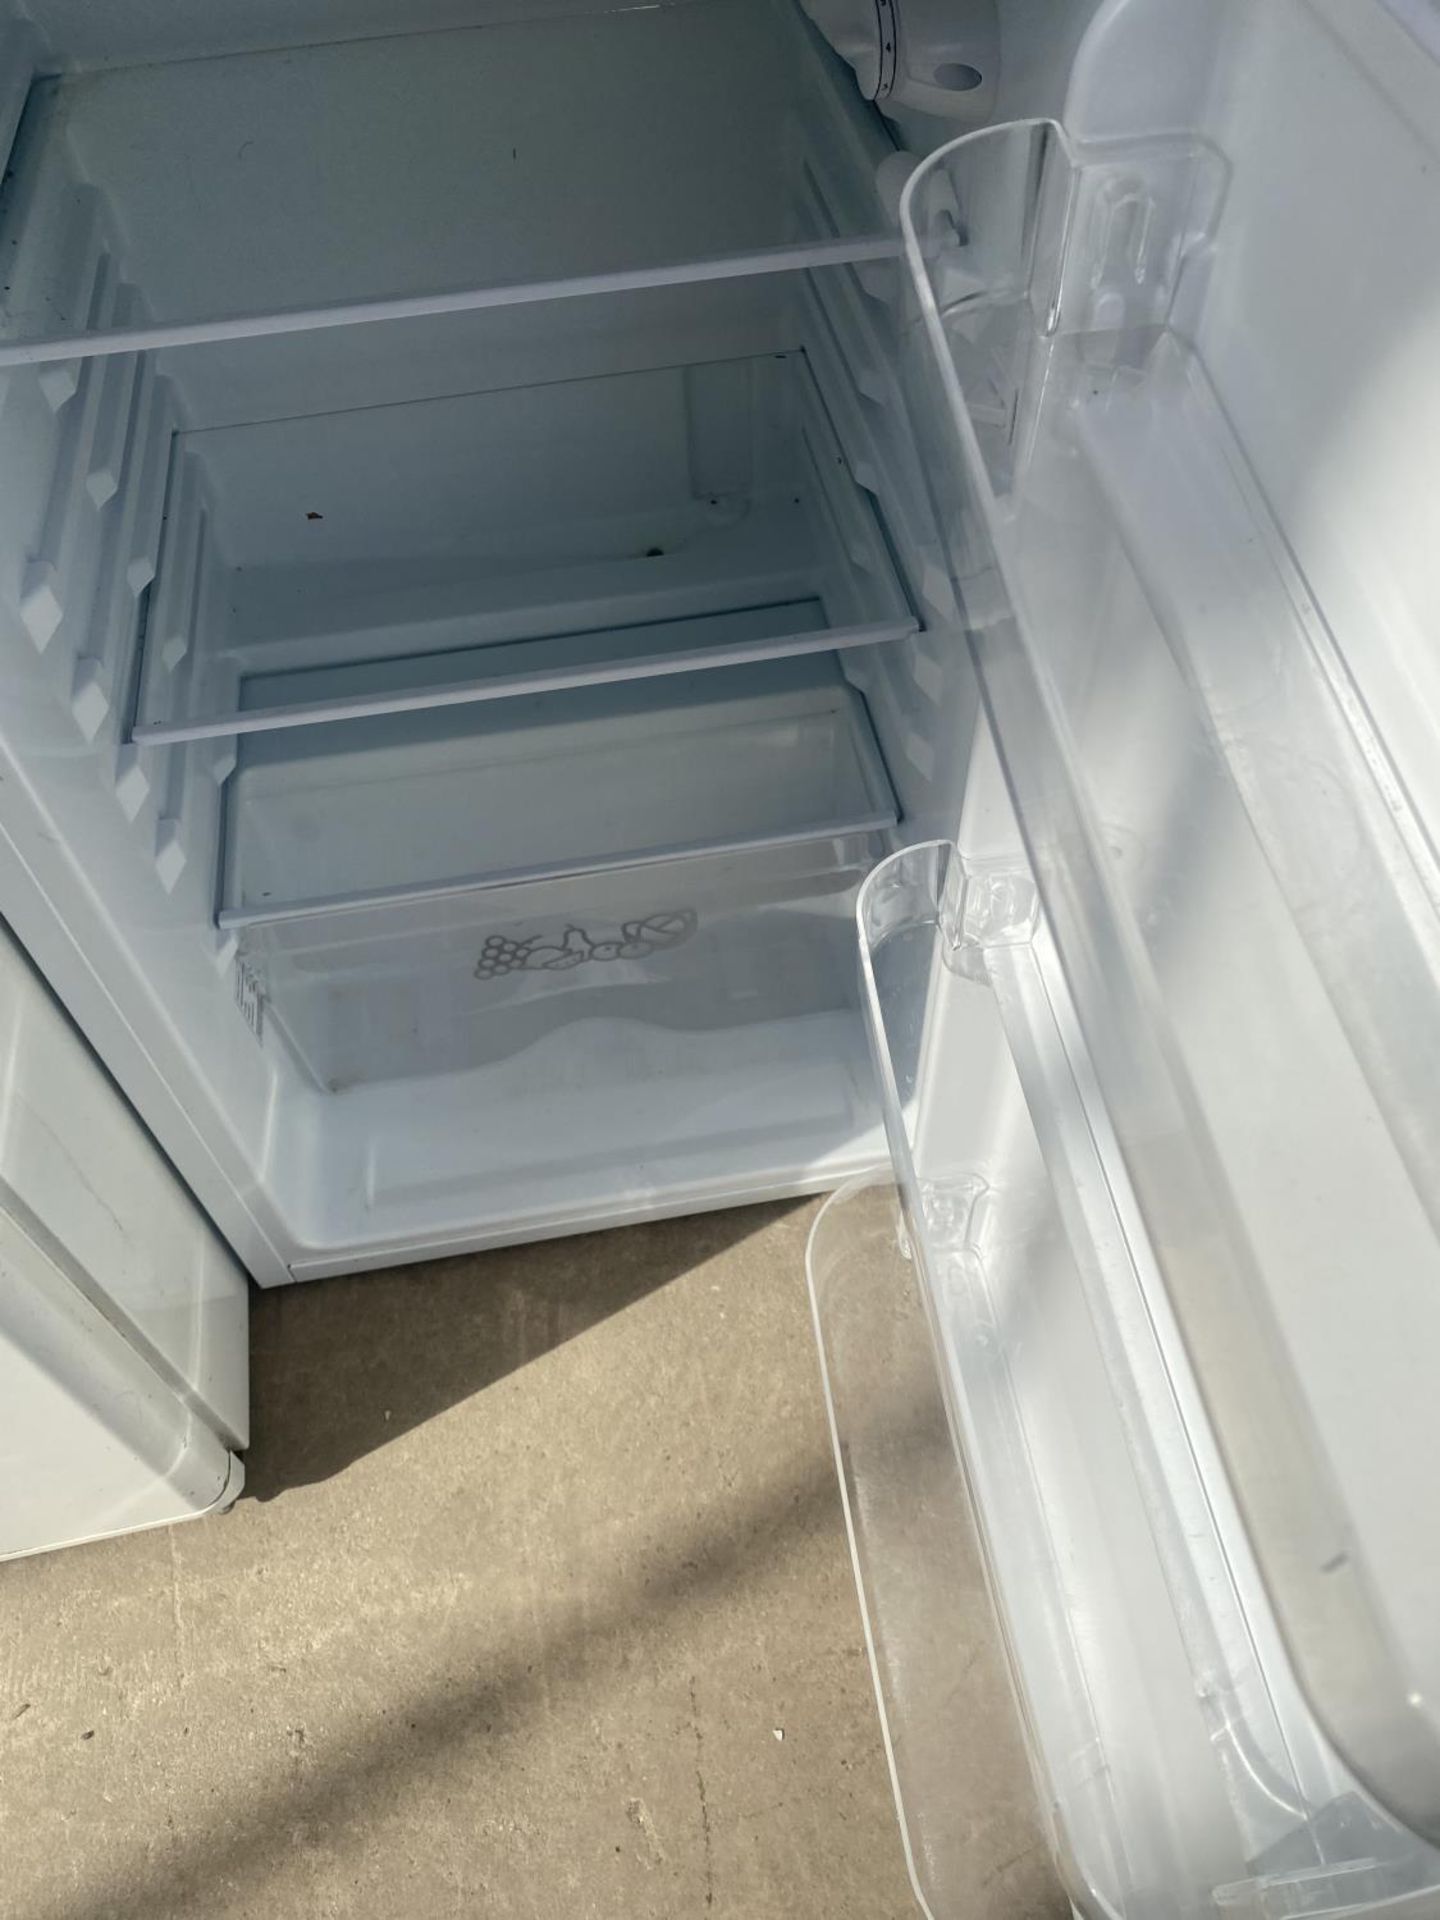 A WHITE ZANUSSI UNDER COUNTER FRIDGE BELIEVED IN WORKING ORDER BUT NO WARRANTY - Image 3 of 3